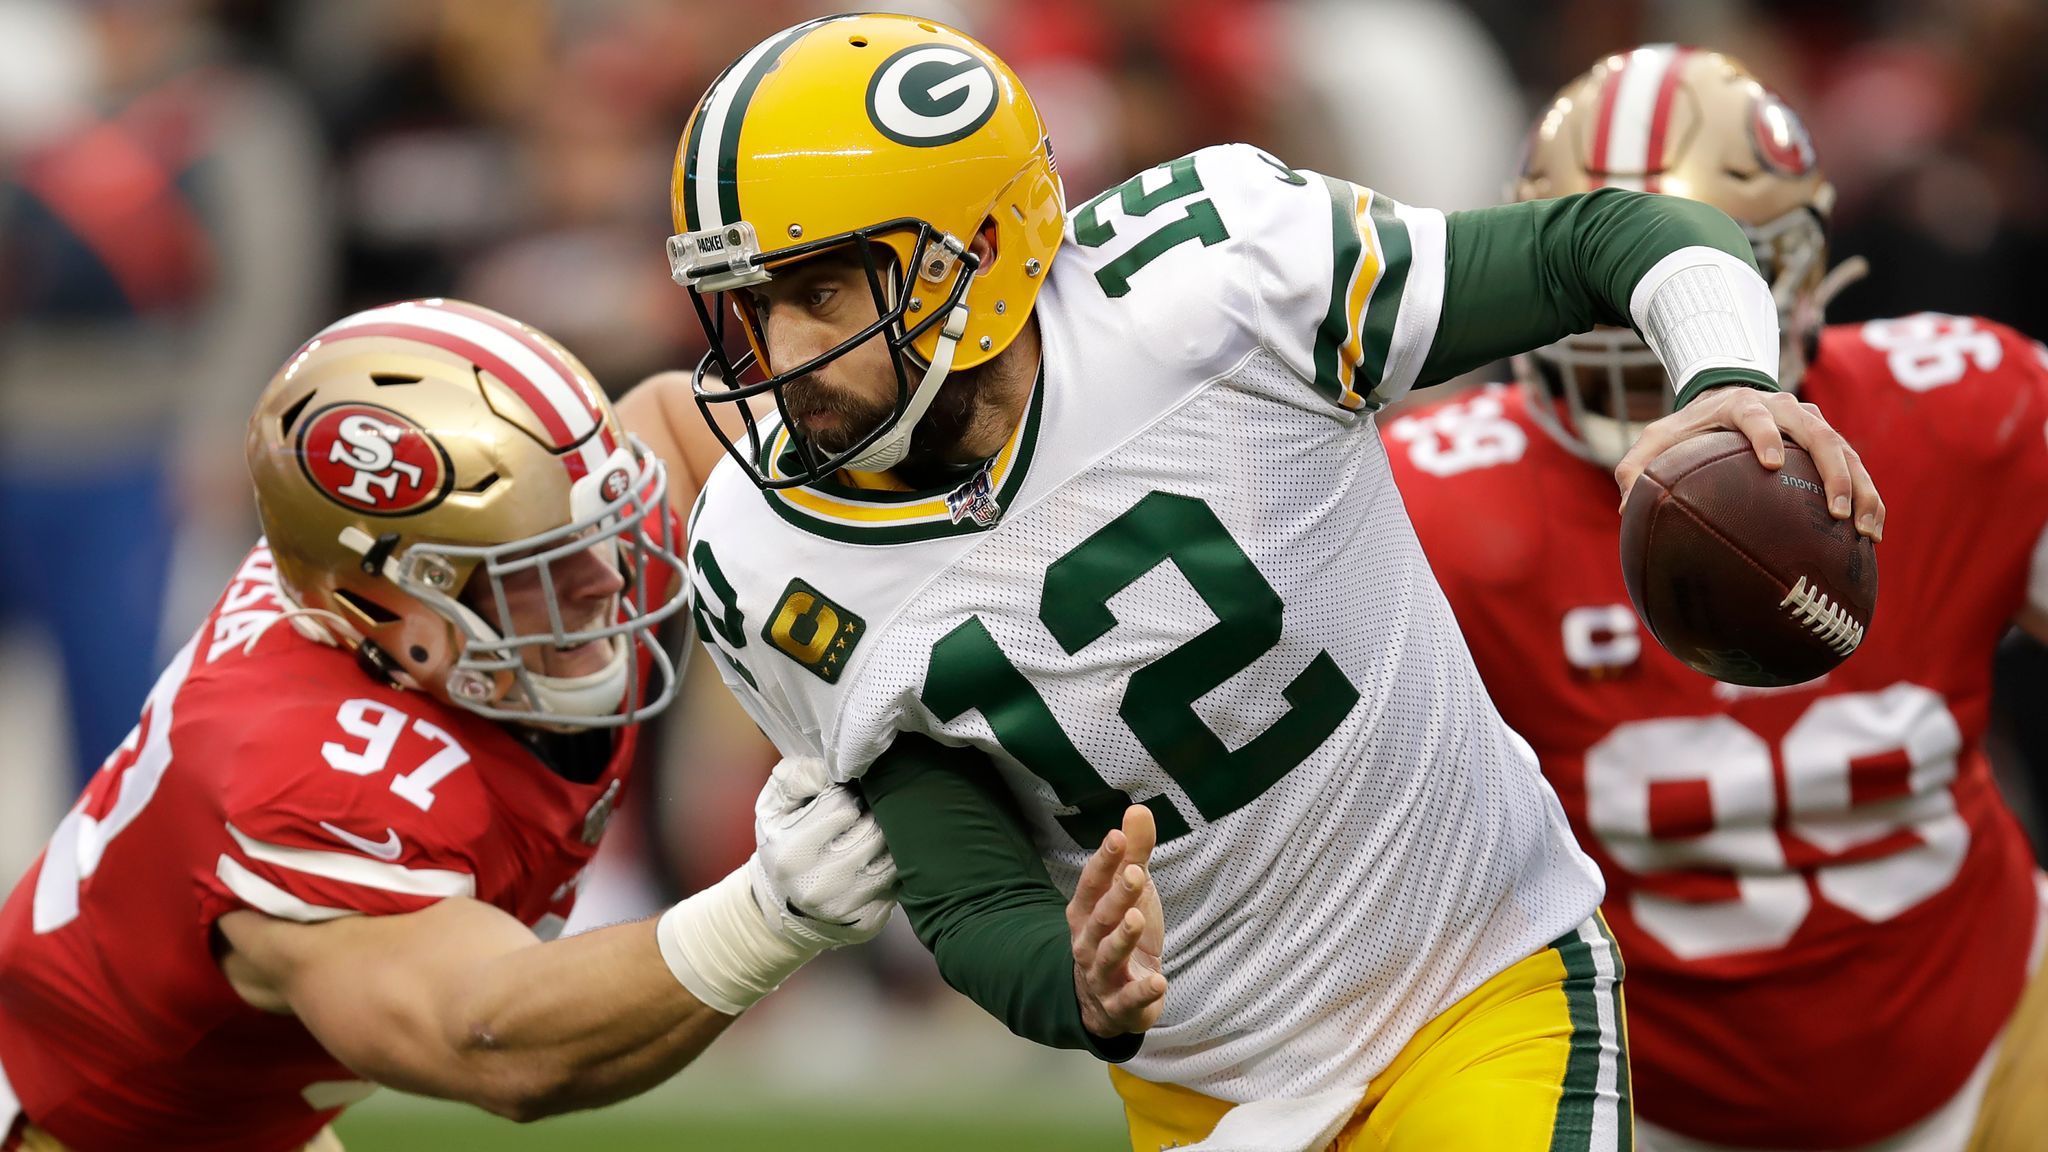 San Francisco 49ers and Green Bay Packers playoff rivalry renewed in  divisional round, NFL News